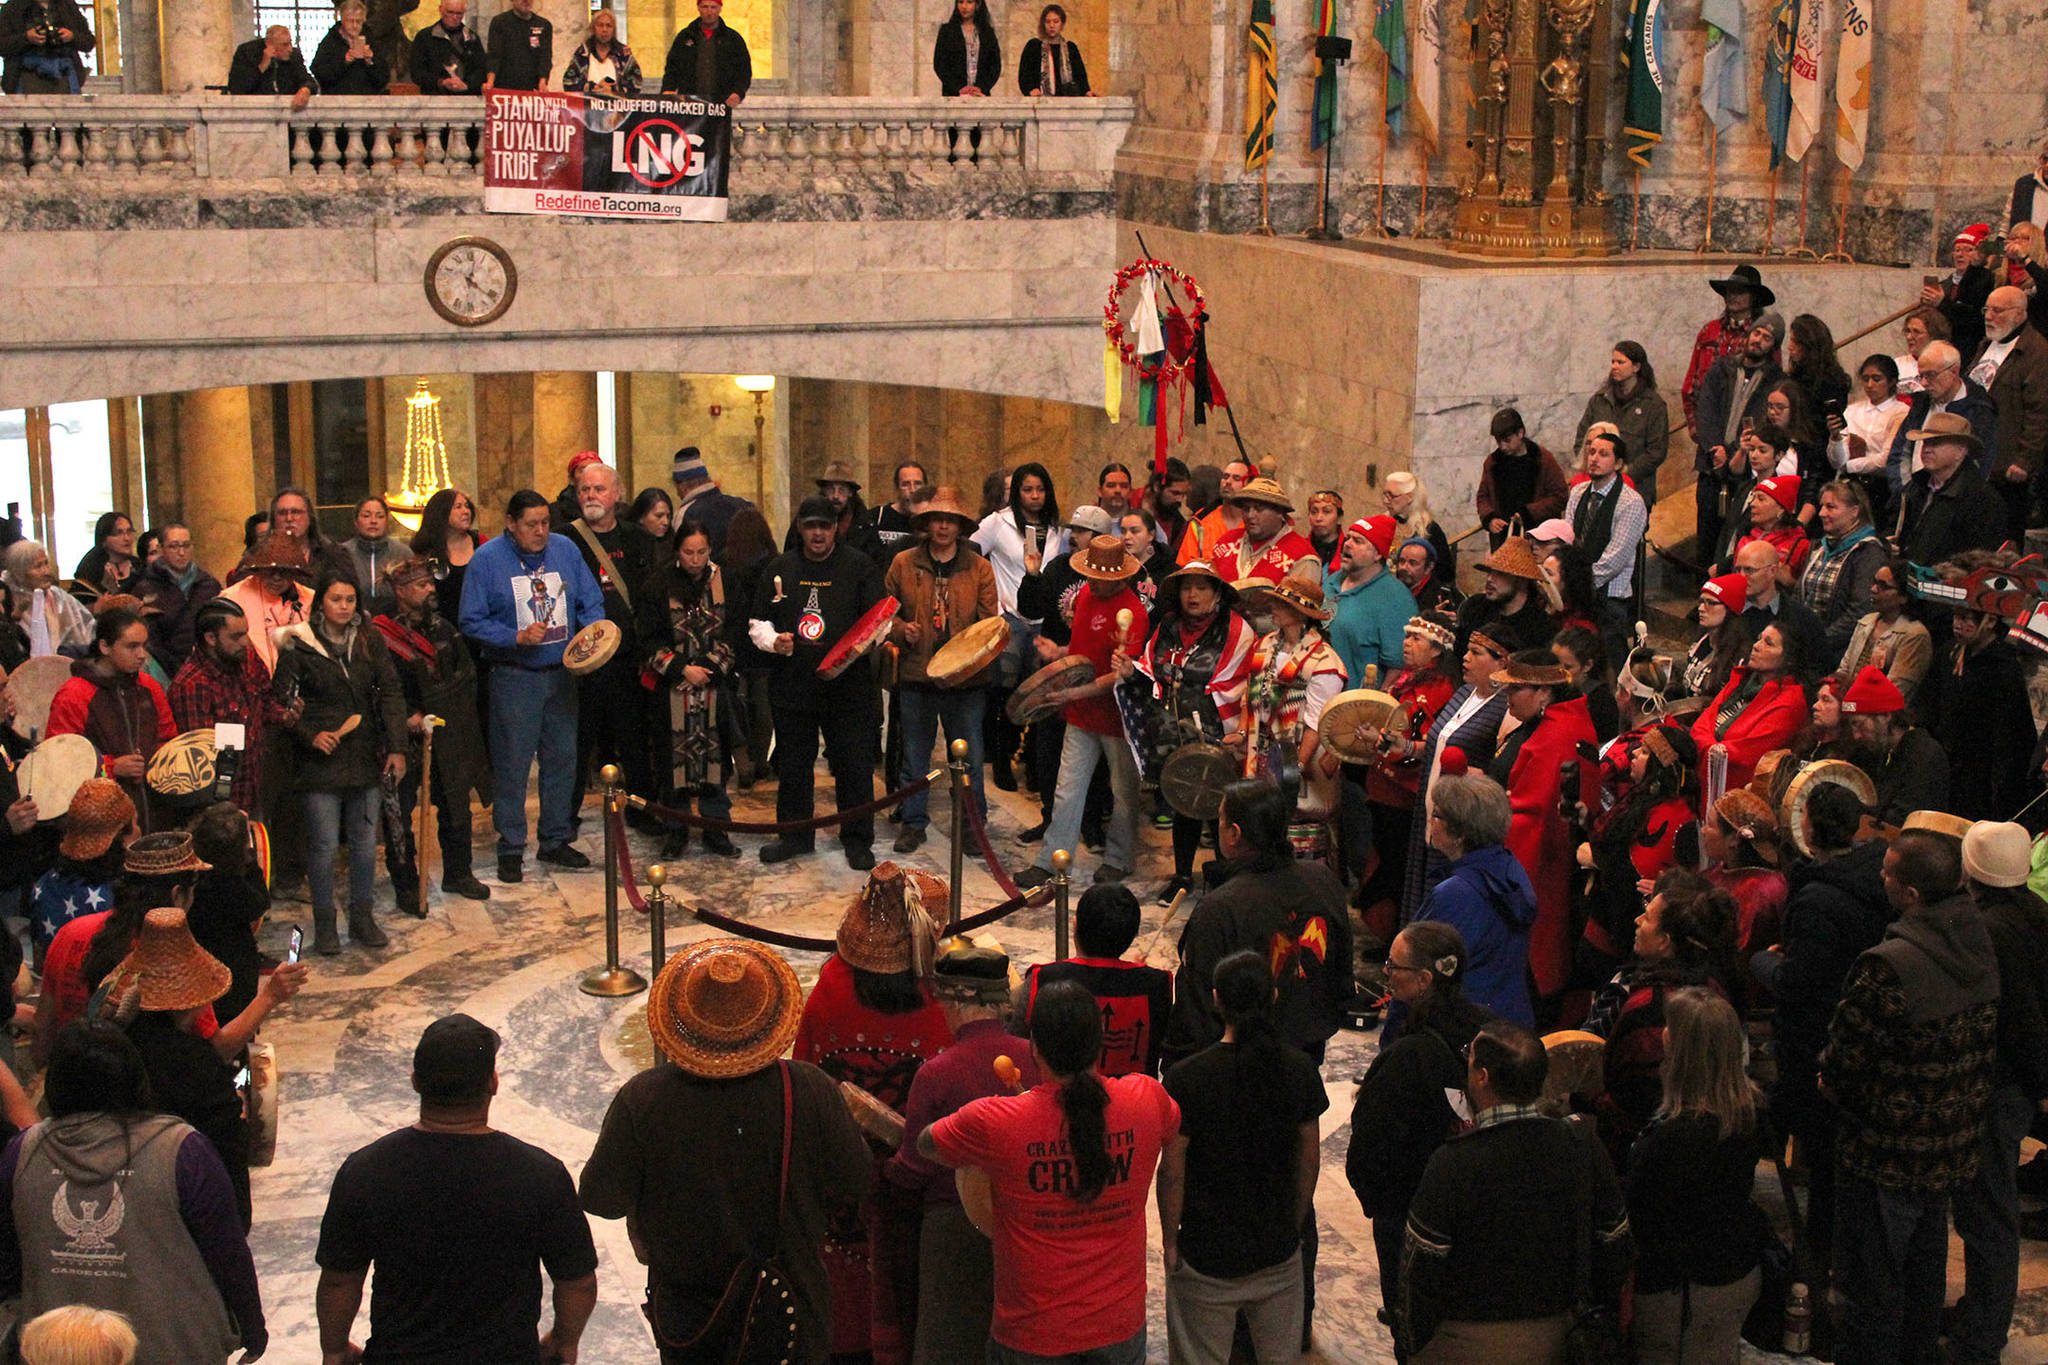 American Indian activists rally in Olympia